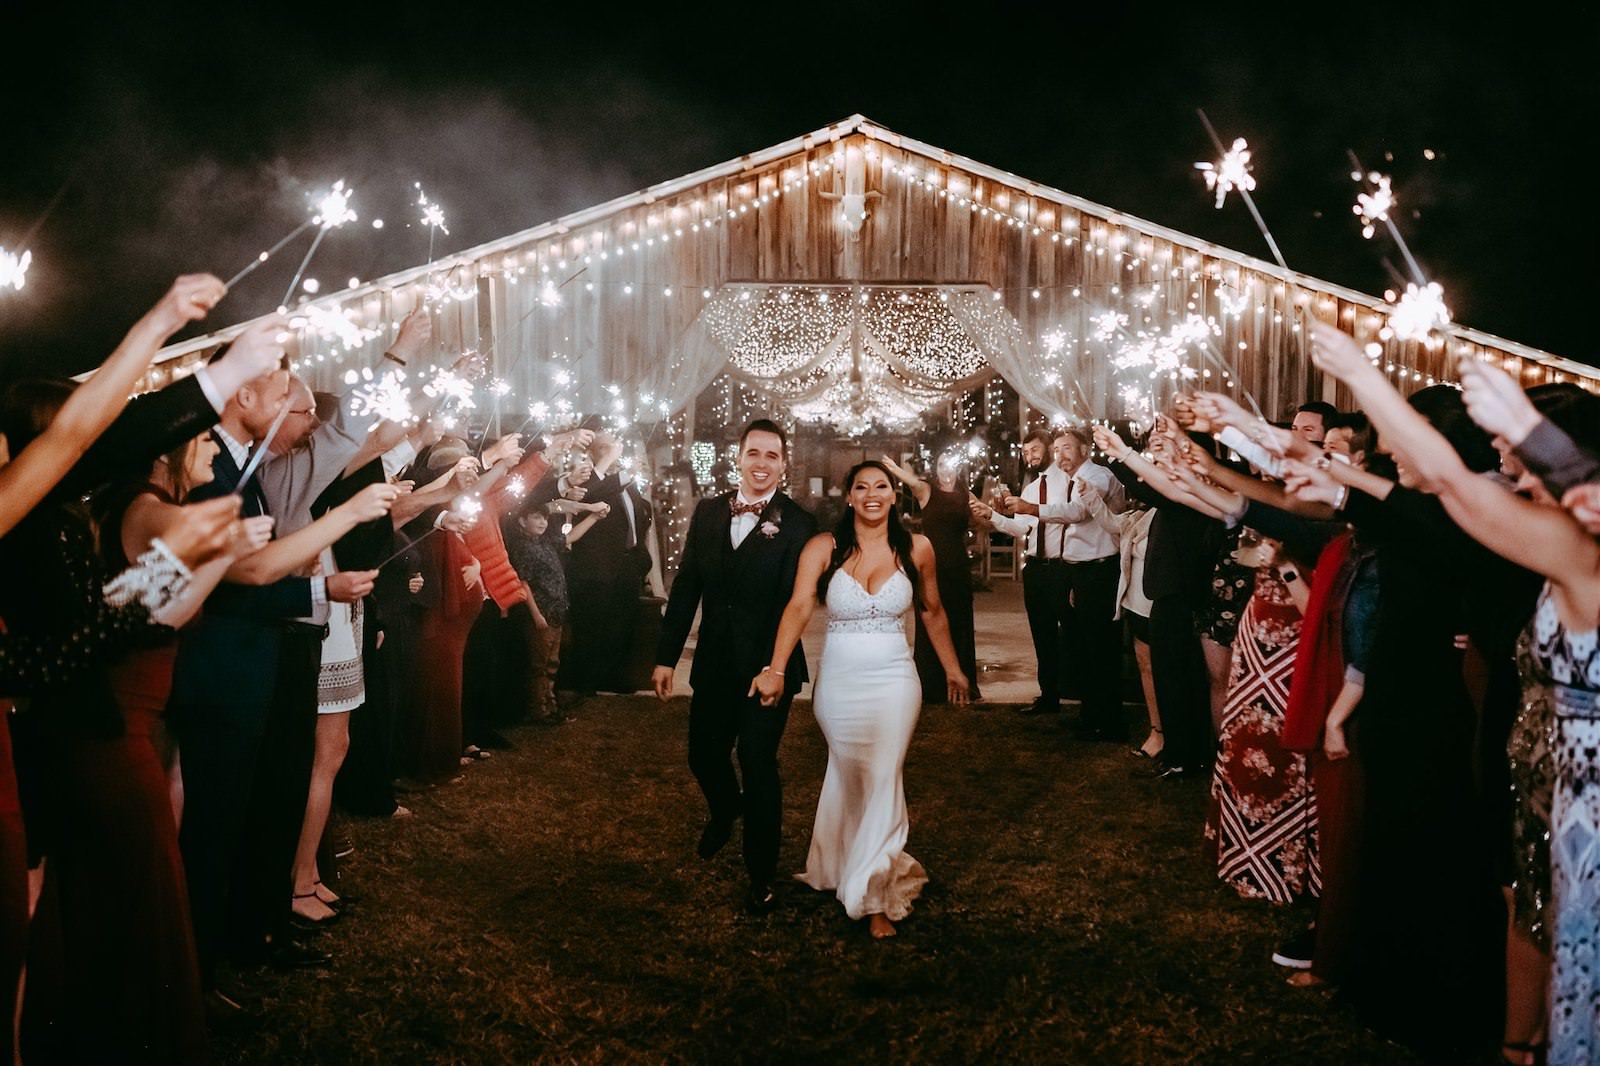 Rustic Barn Tampa Wedding with Twinkle Lights | Bride and Groom Sparkler Send Off | Enzoani Lace Mermaid Sweetheart Bridal Gown Wedding Dress